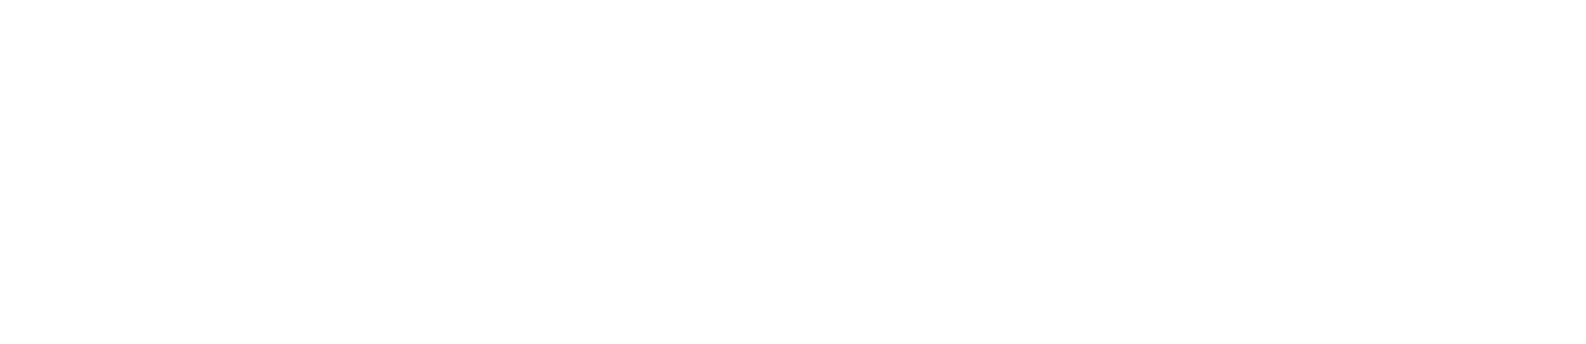 Air Asia Company Limited (AACL) logo large for dark backgrounds (transparent PNG)